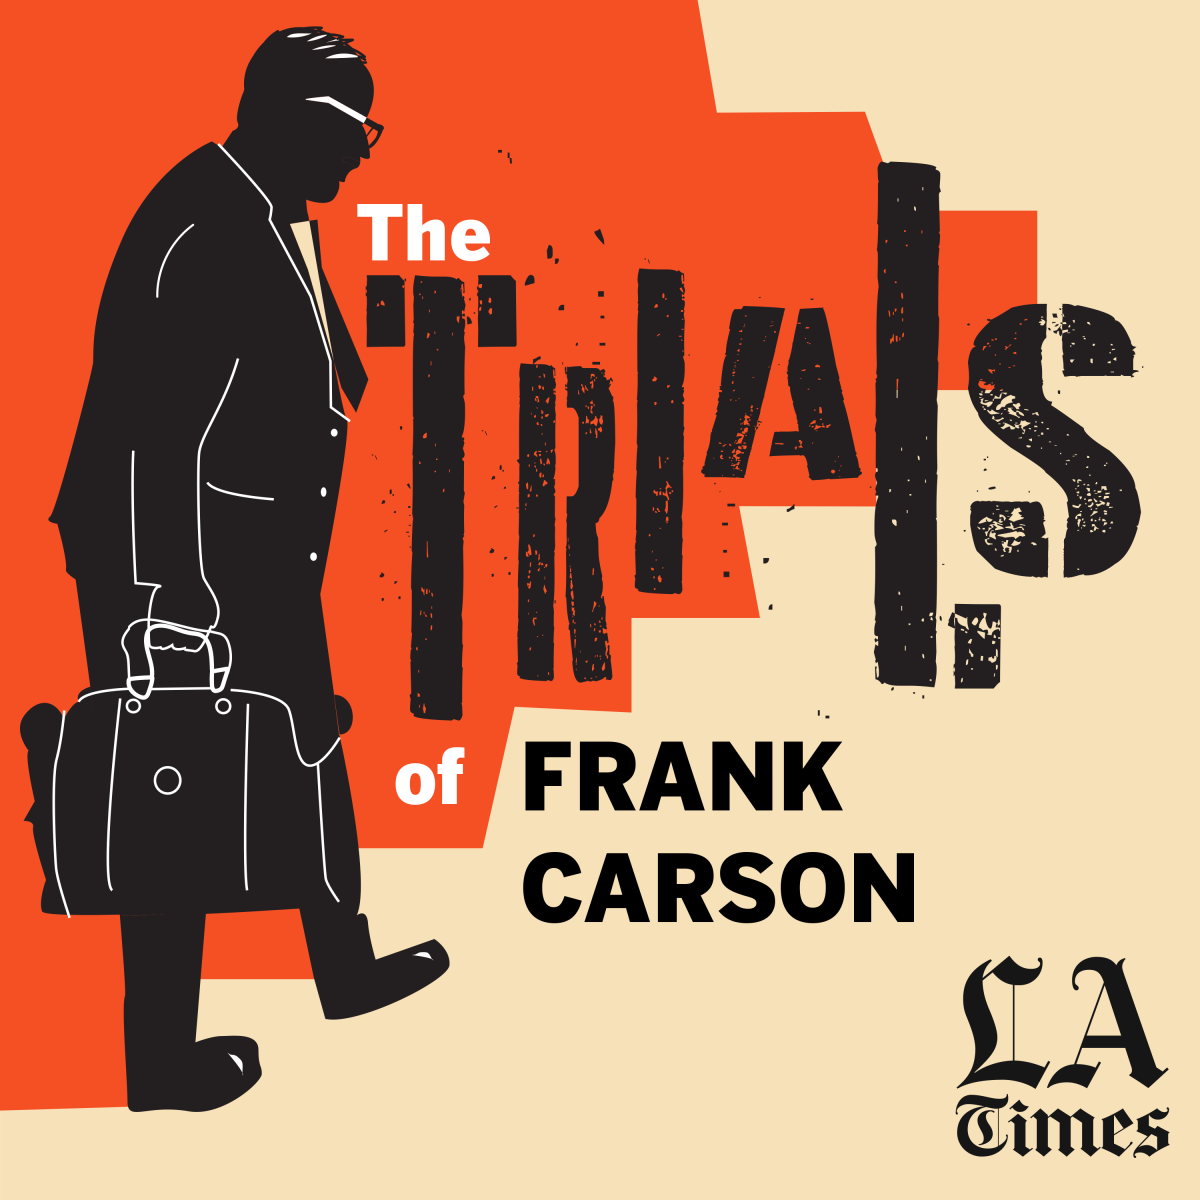 An illustration of Frank Carson walking and carrying a briefcase.